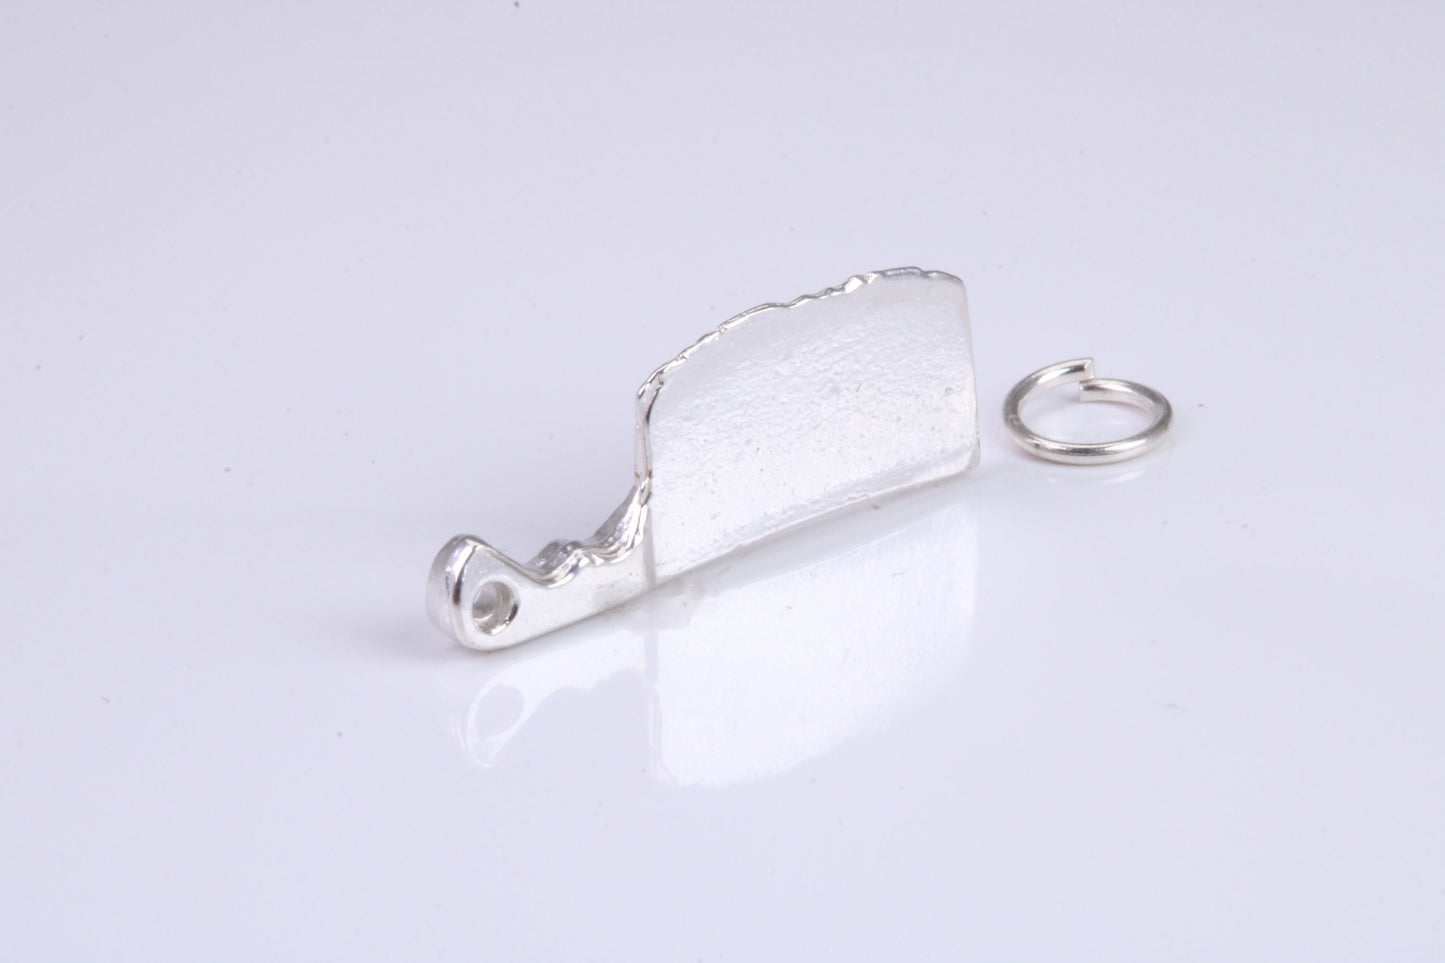 Cleaver Charm, Traditional Charm, Made from Solid 925 Grade Sterling Silver, Complete with Attachment Link